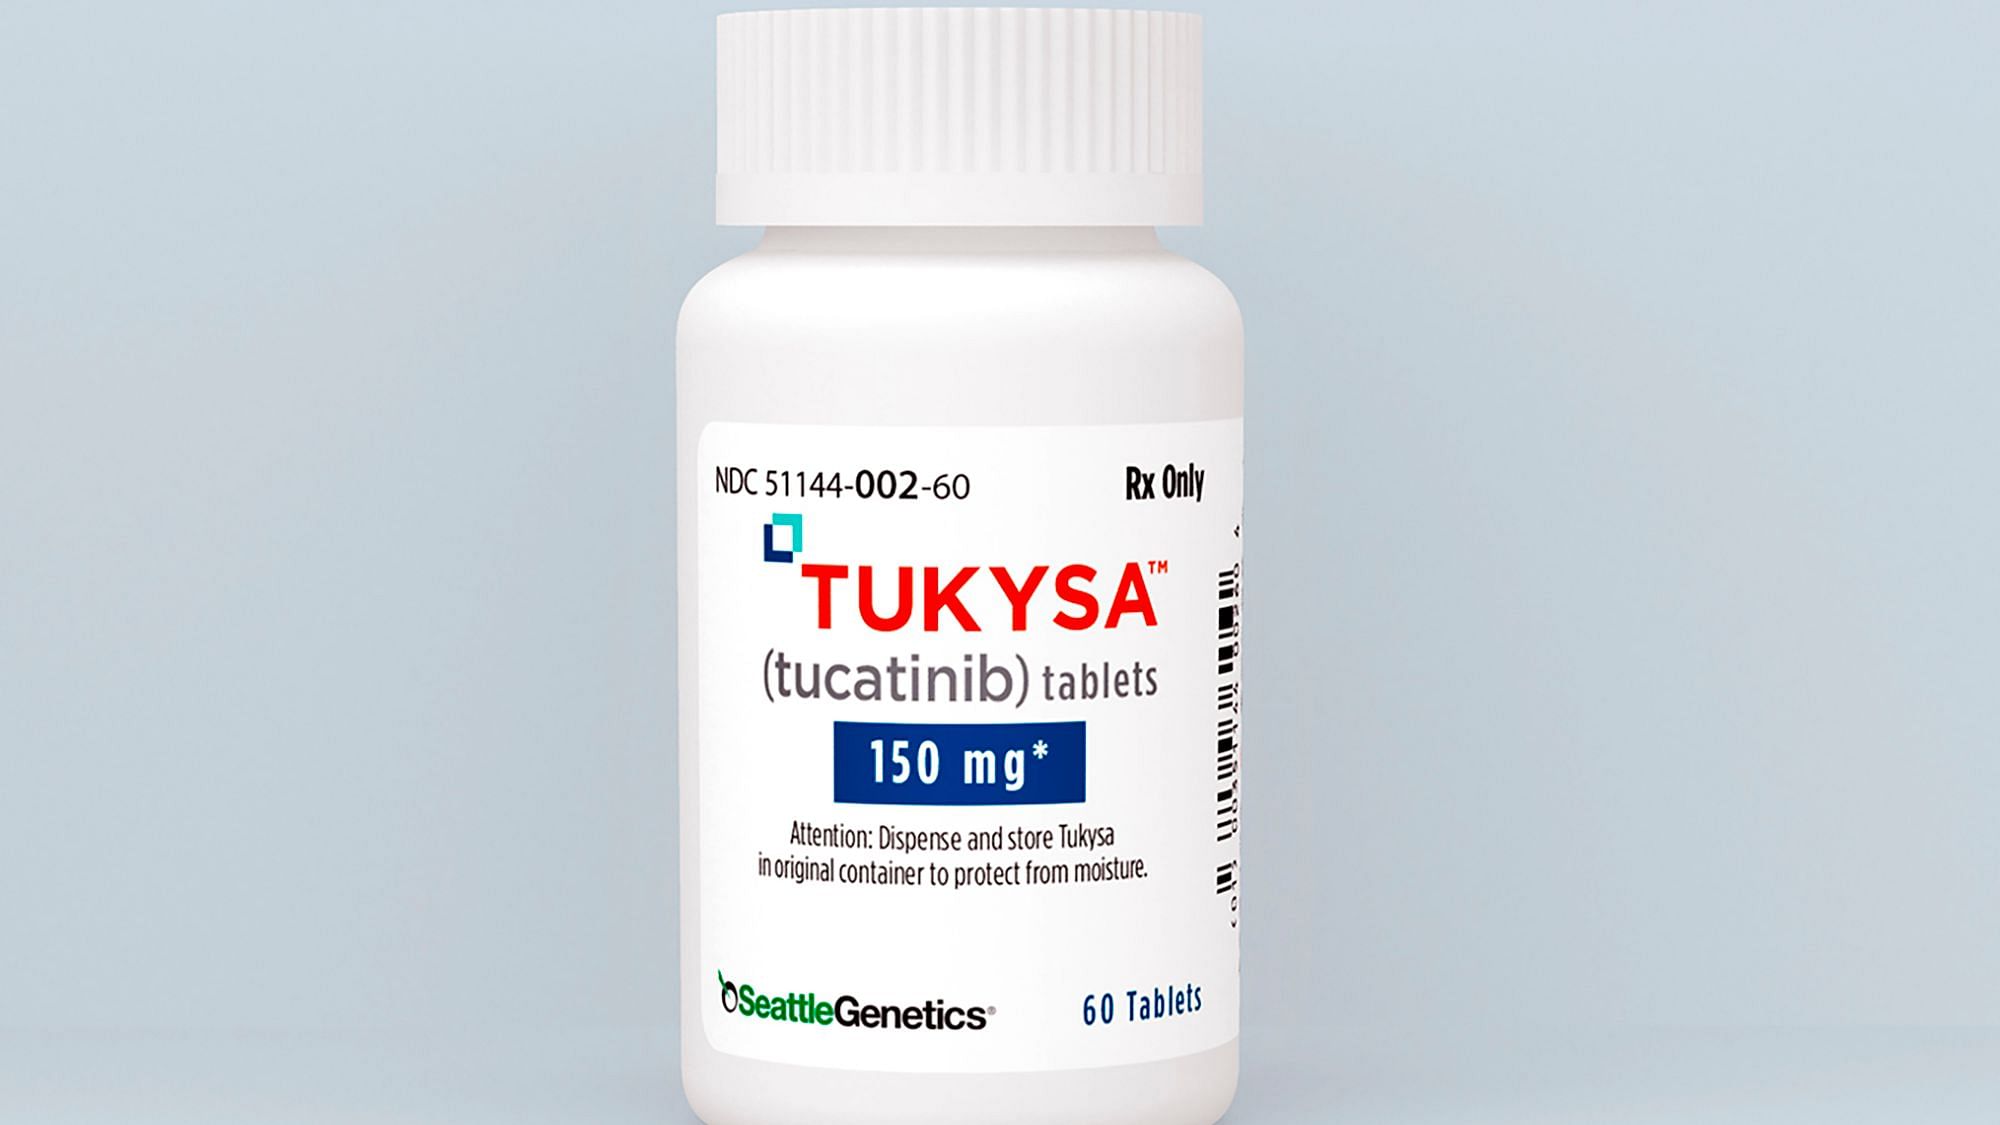 The FDA also advised that women who are pregnant or breastfeeding should not take Tukysa.